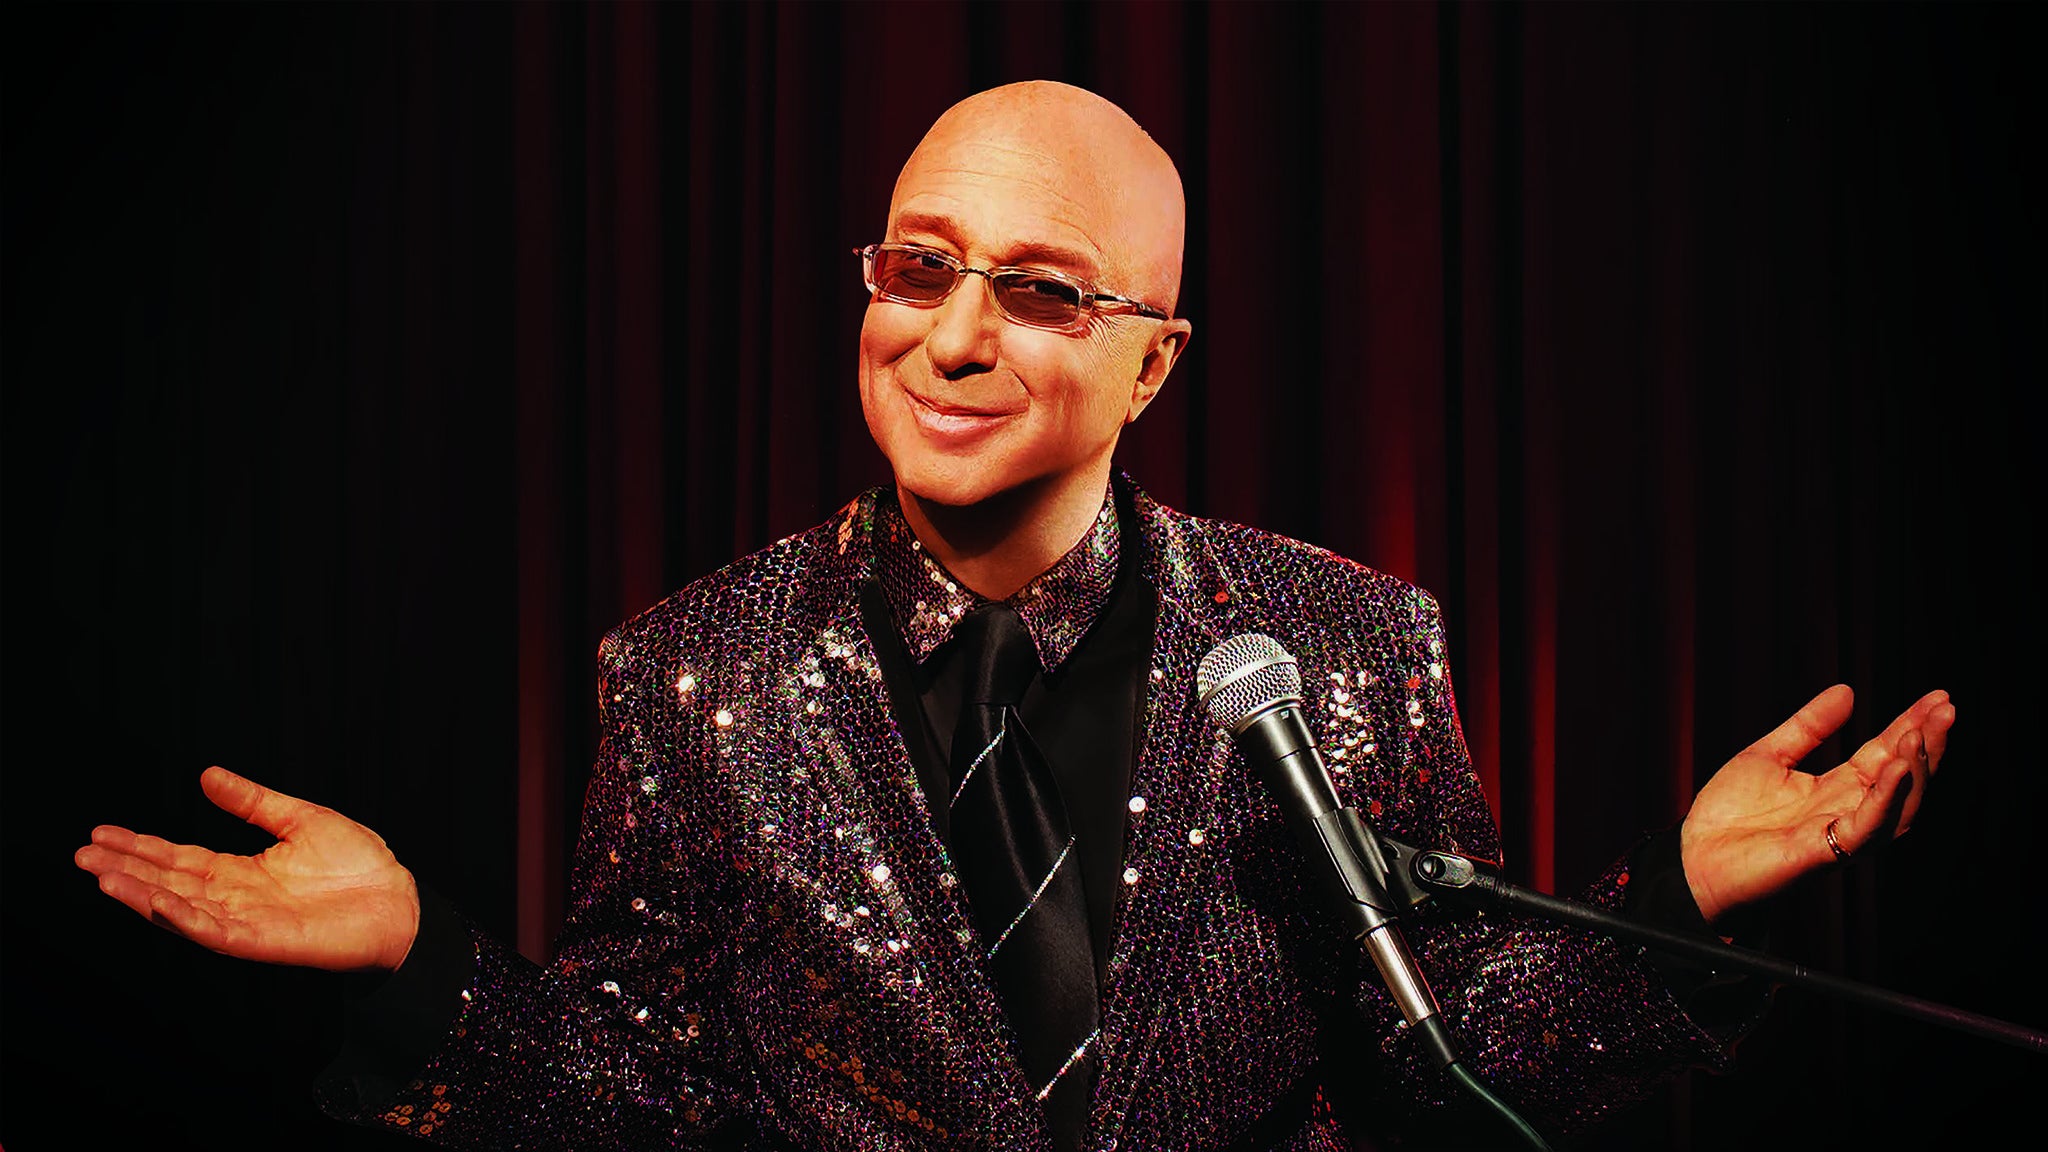 Paul Shaffer & the World's Most Dangerous Band plus Guest Vocalist in Westbury promo photo for Citi® Cardmember Preferred presale offer code